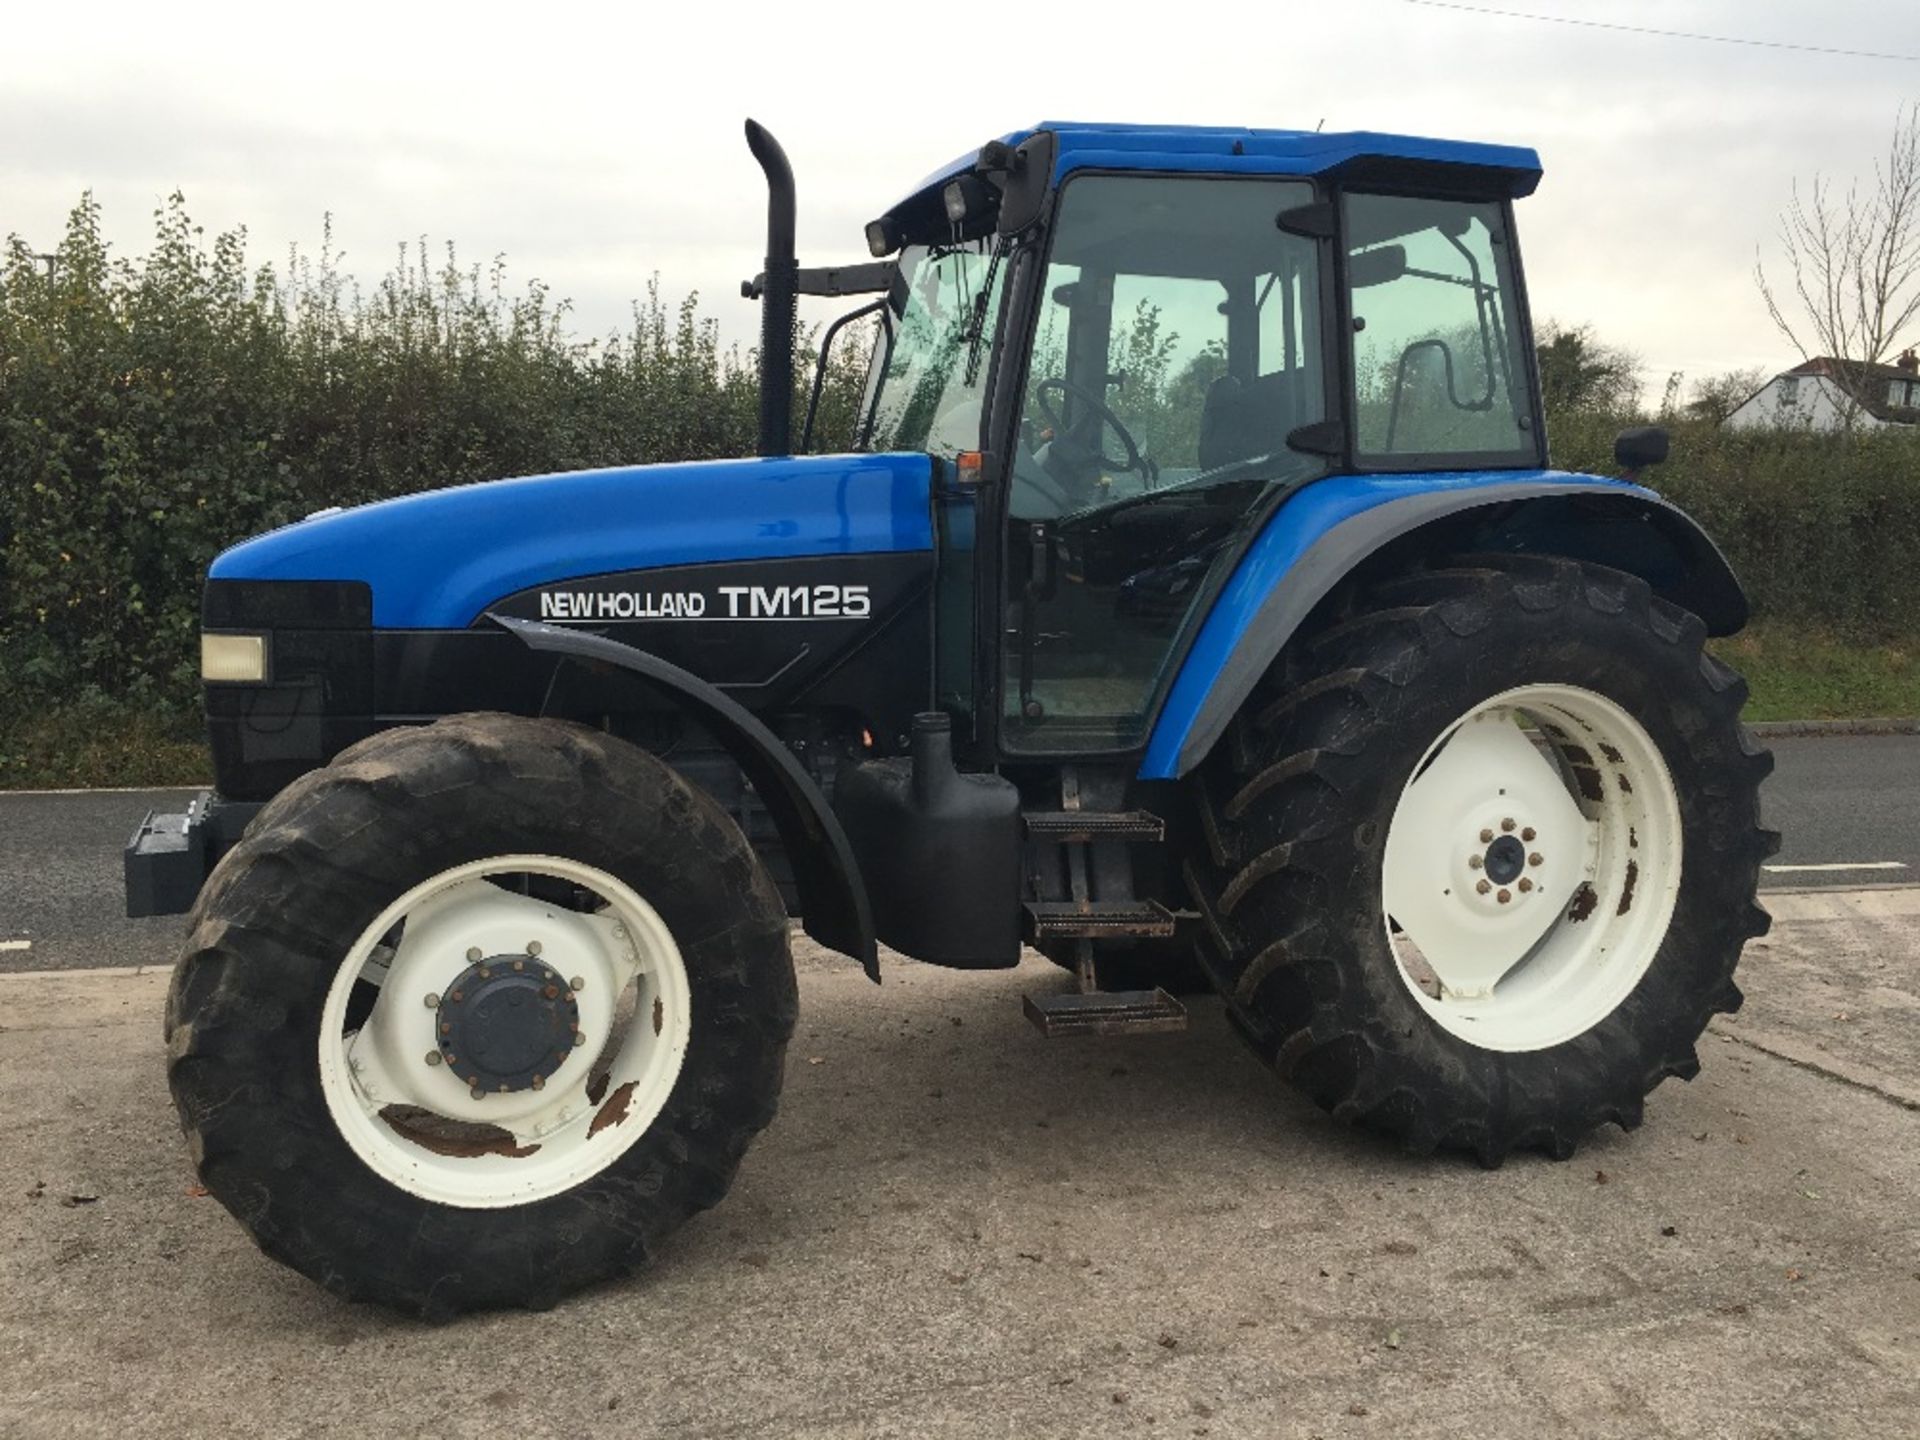 New Holland TM125 Classic Tractor with Pick Up Hitch & Air Con. V5 will be supplied.  Reg.No. RX51